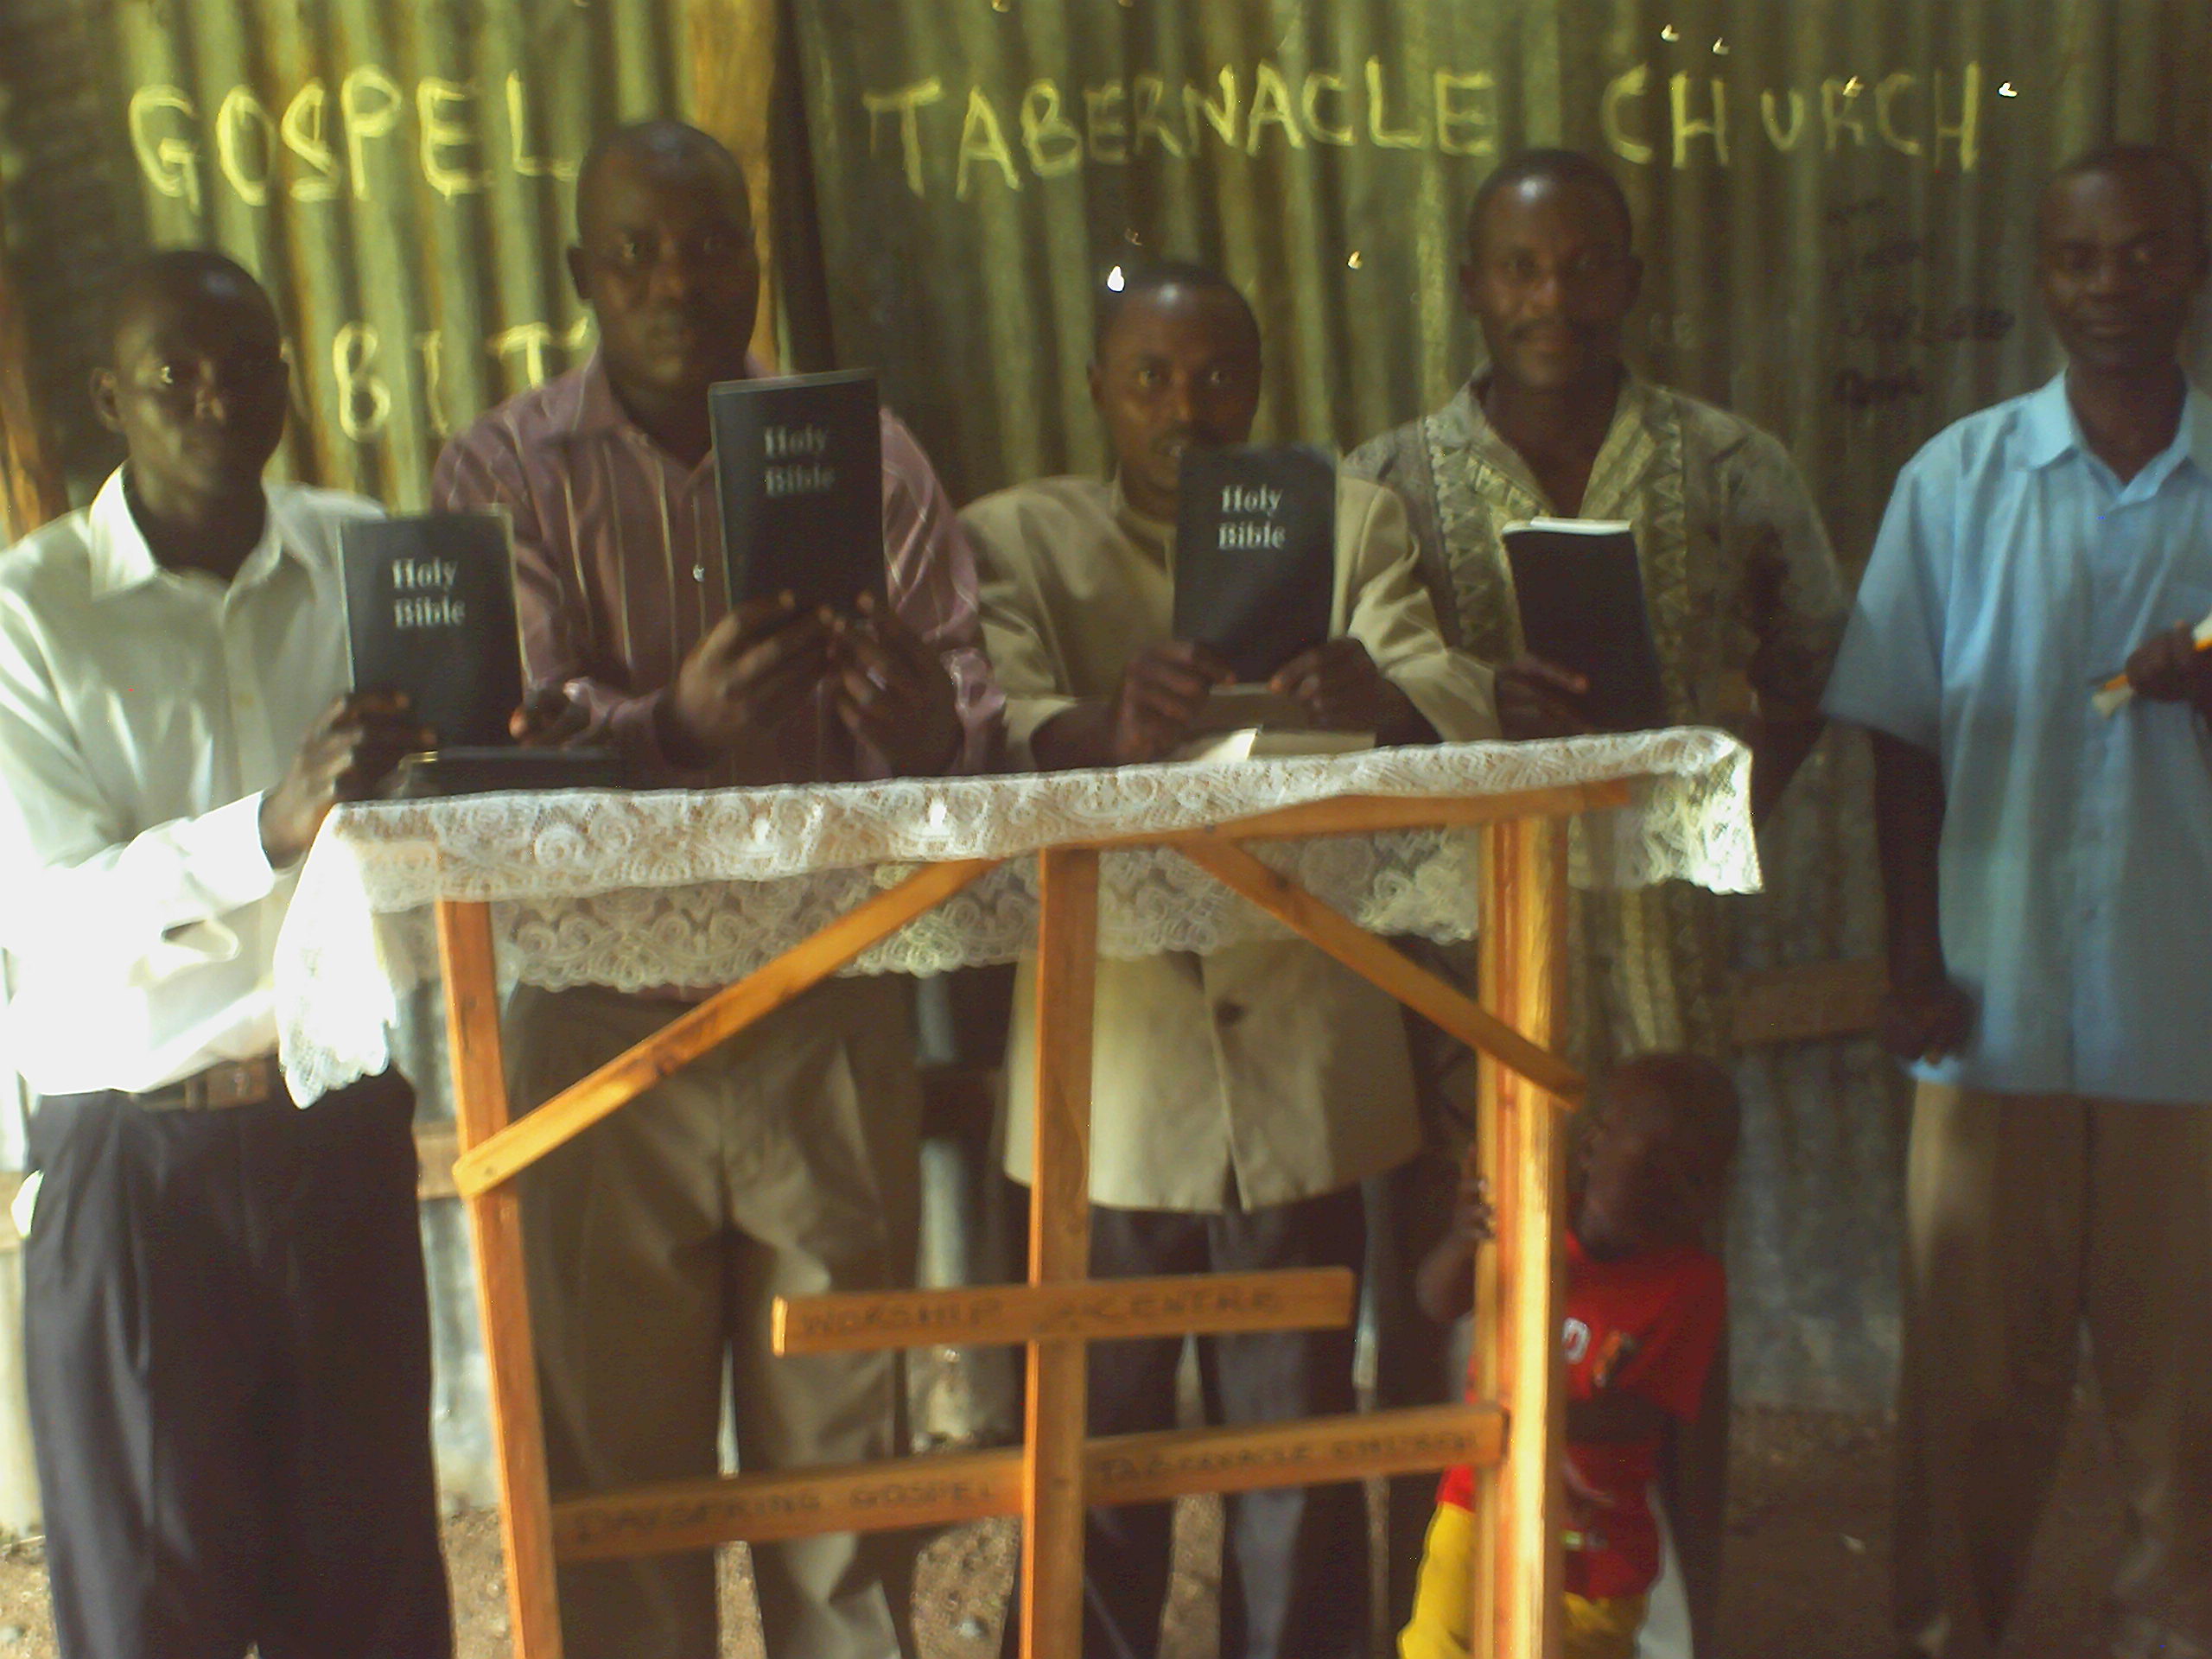 Church members with new Bibles